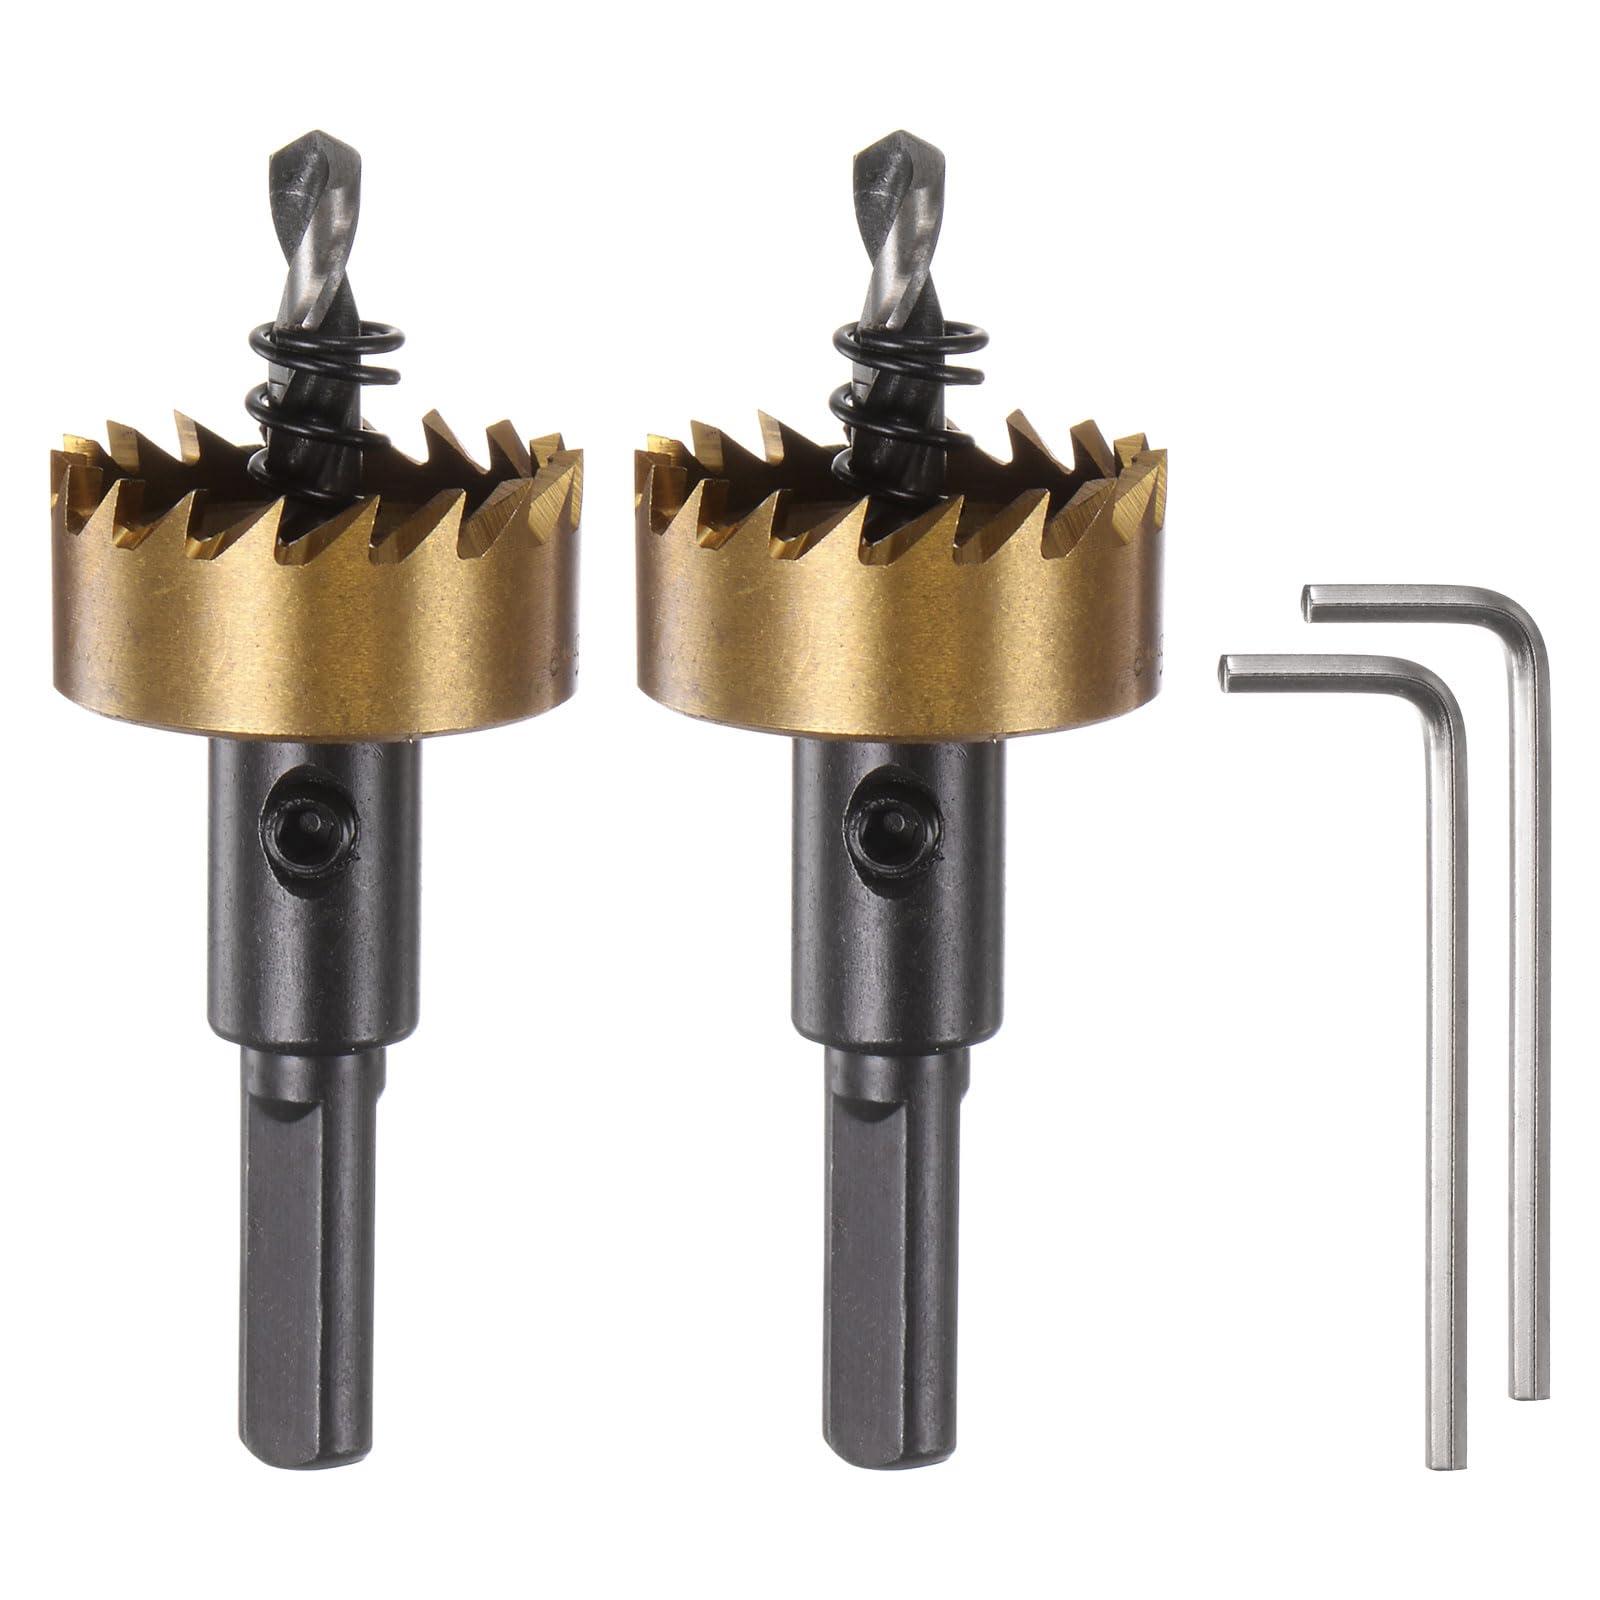 sourcing map 2pcs Hole Saws 28mm (1-1/8") M35 HSS (High Speed Steel) Titanium Coated Drill Bits Cutters Openers for Stainless Steel Aluminum Alloy Metal Wood Plastic